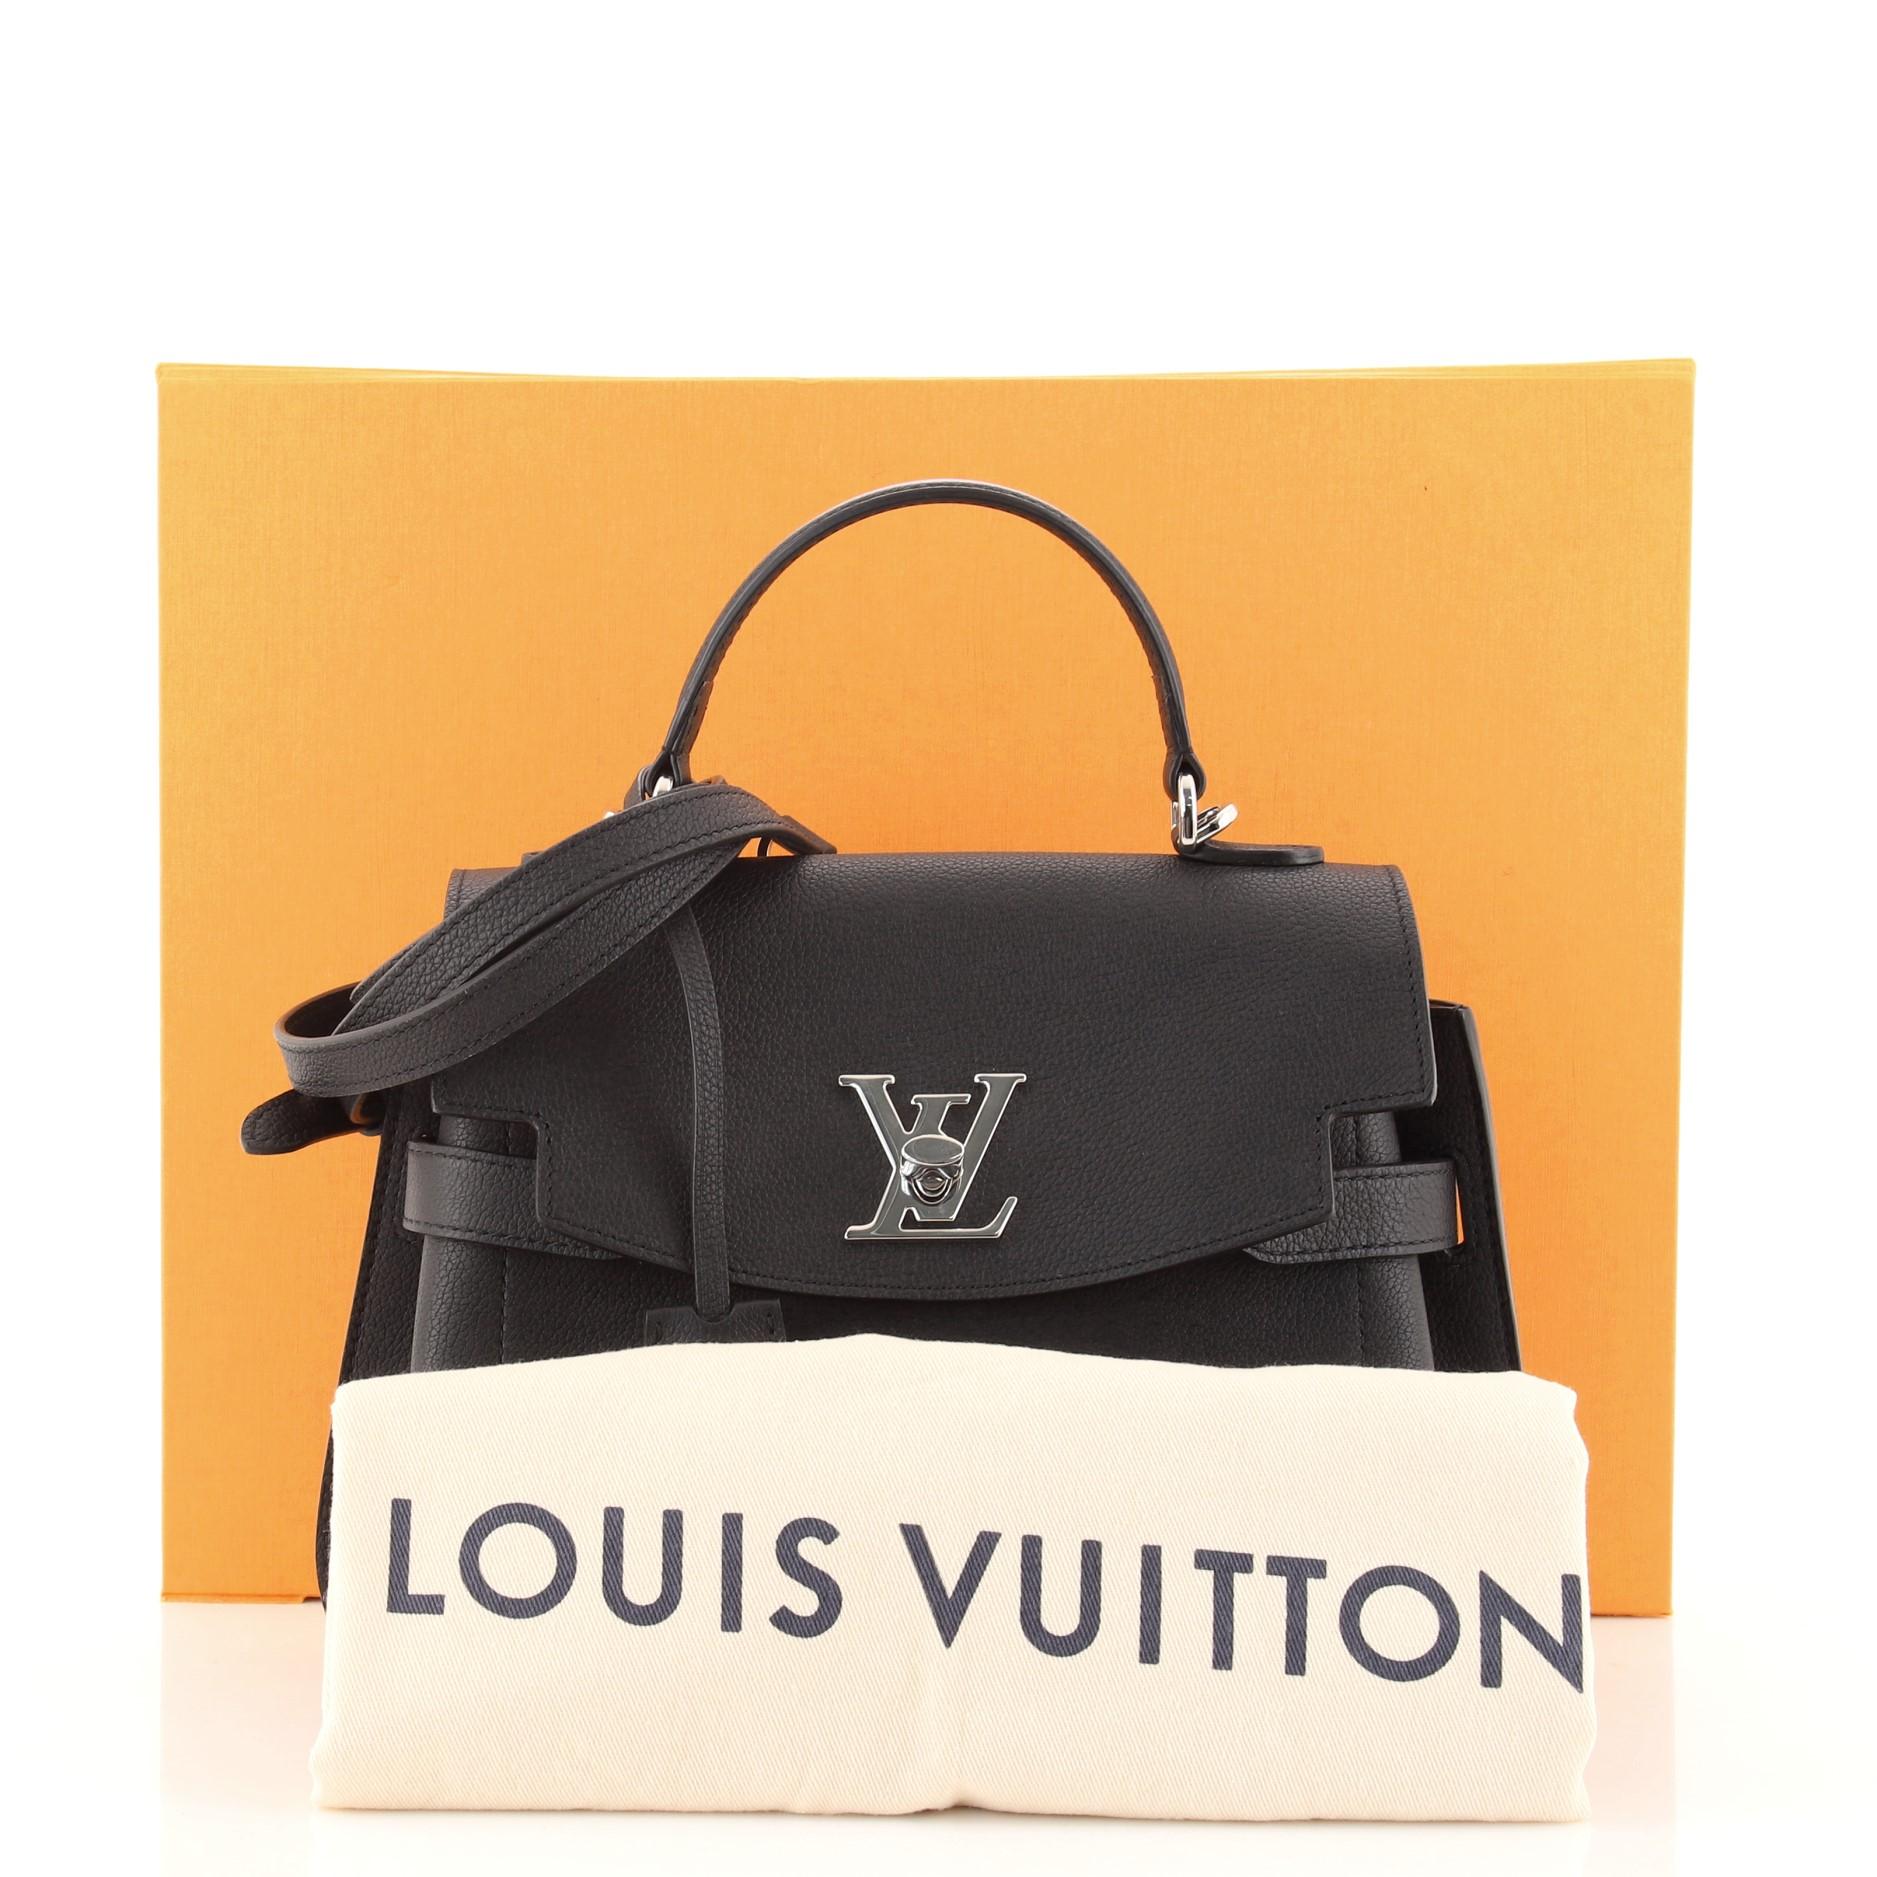 Louis Vuitton Lockme Ever Bag - For Sale on 1stDibs